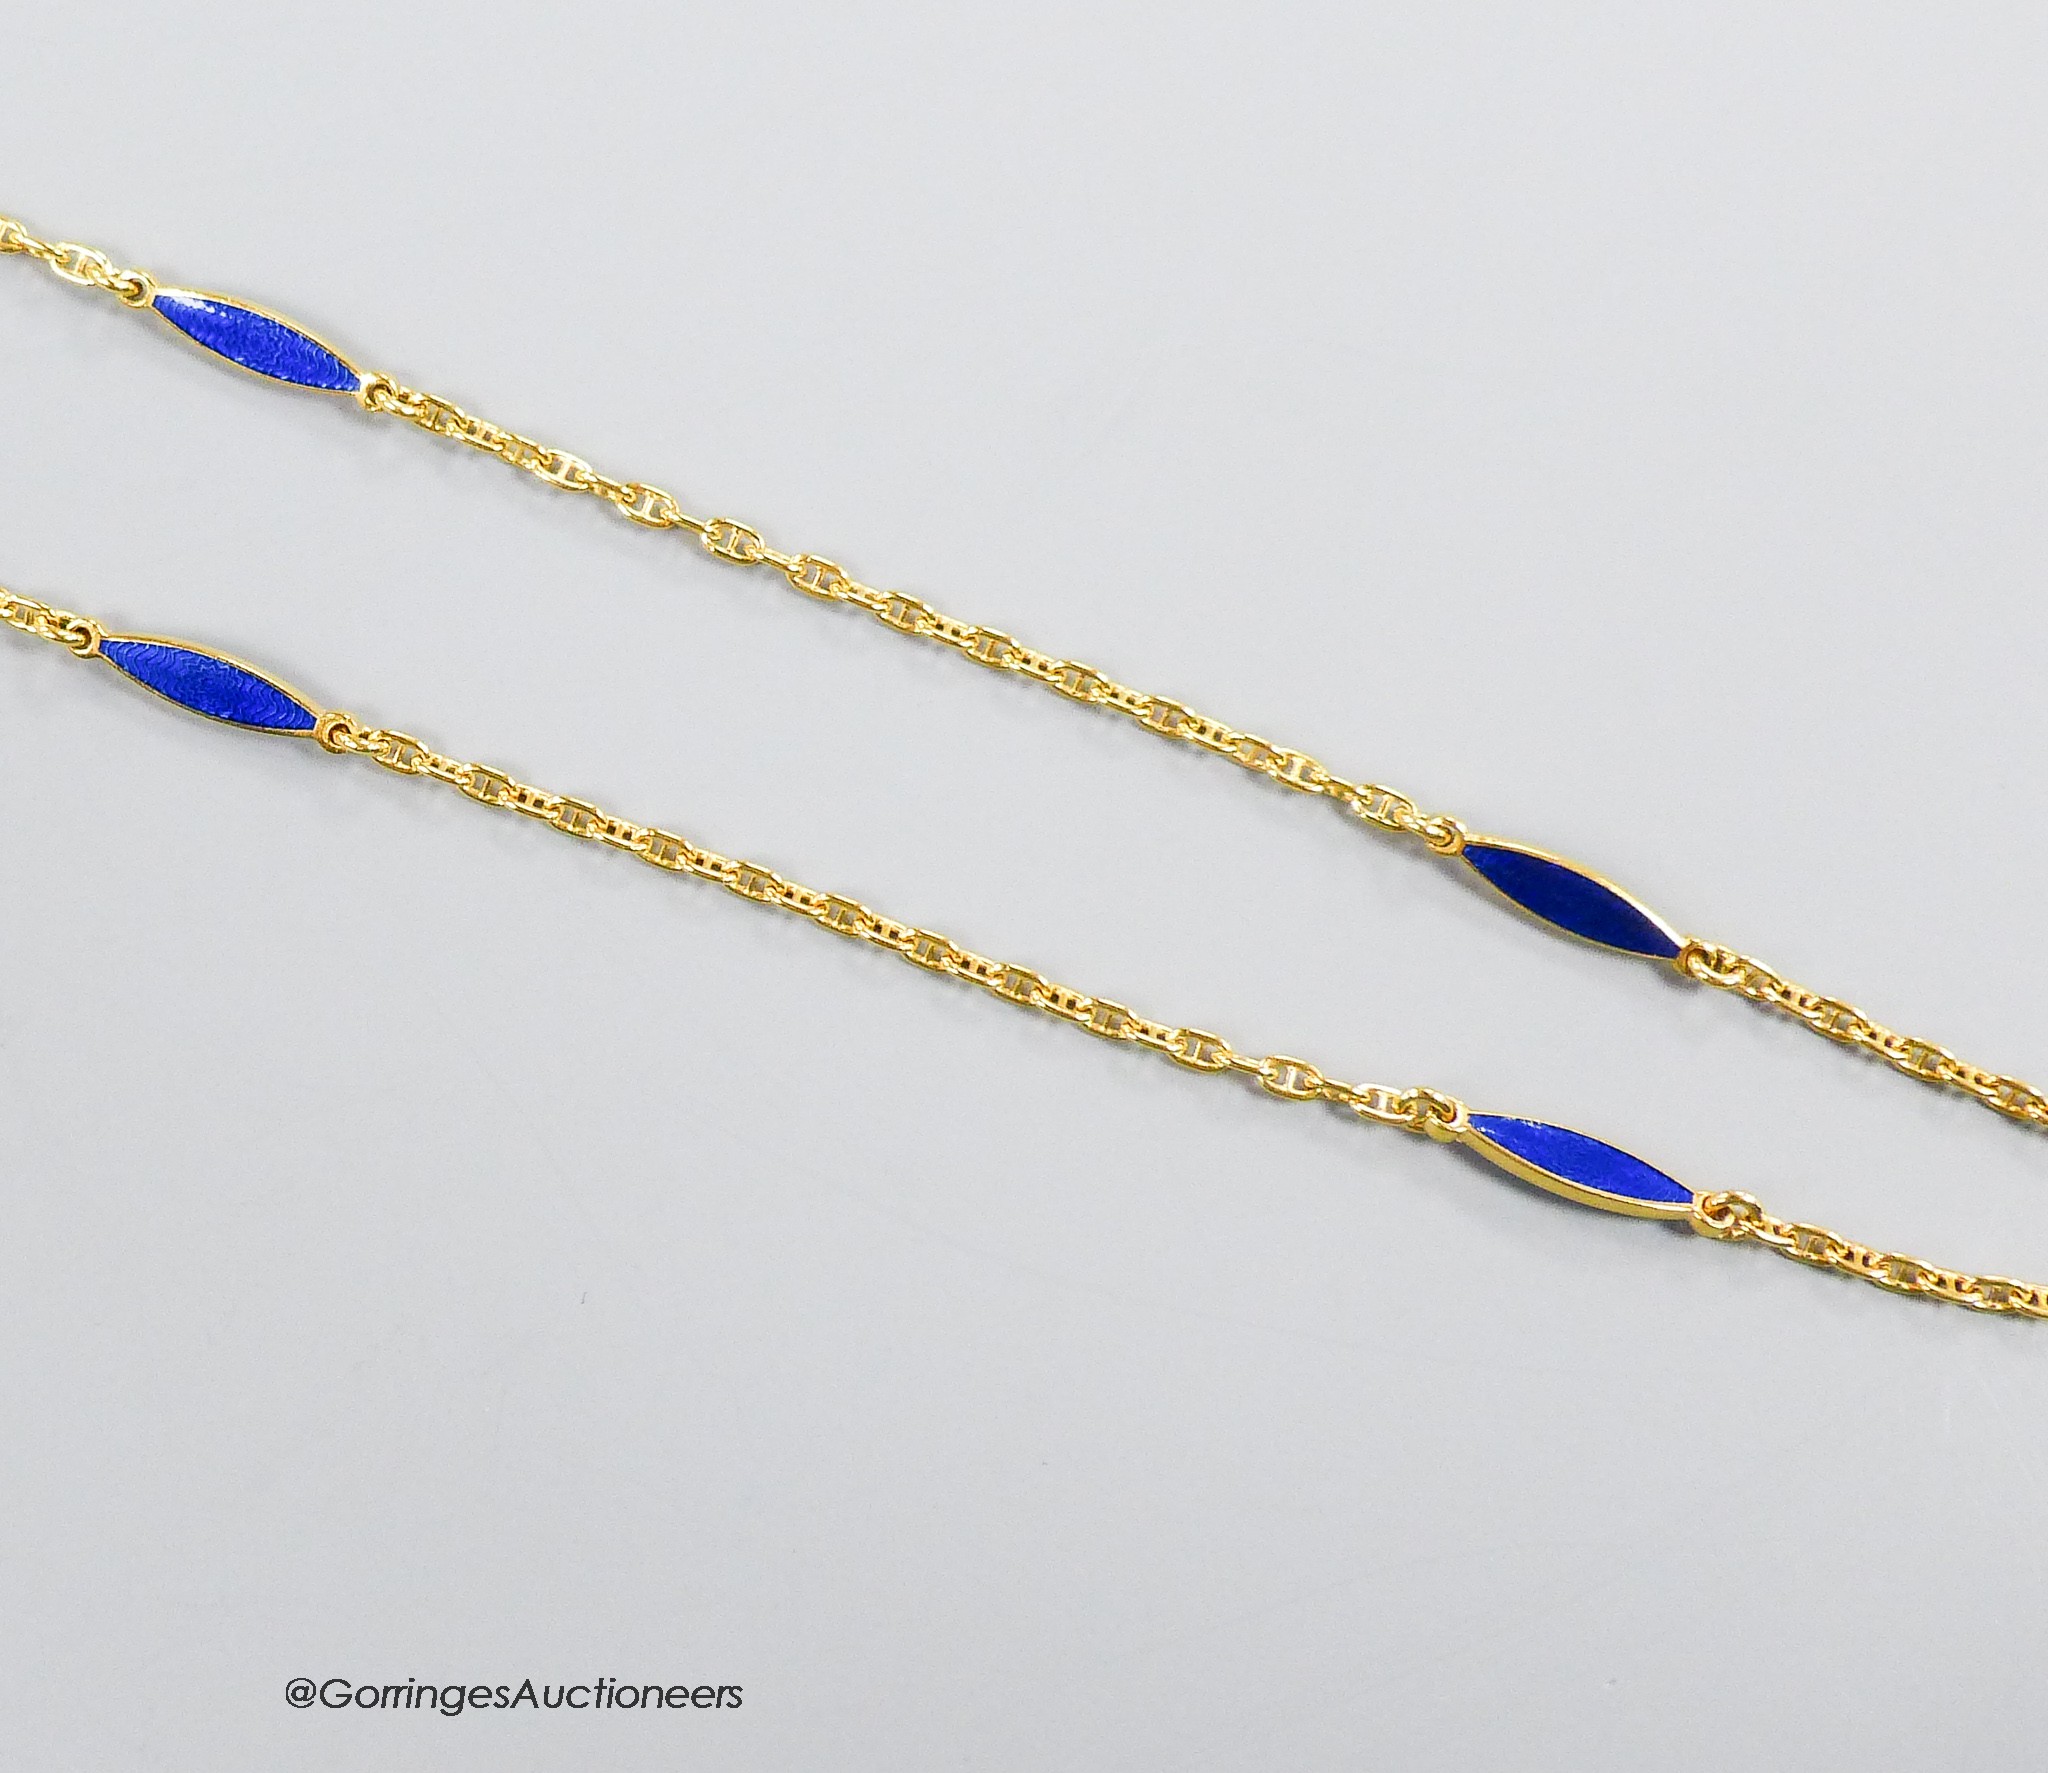 An early 21st century Victor Mayer for Faberge limited edition (208/500) 750 yellow metal and blue enamel choker necklace, 45cm, gross weight 8 grams, with original box and certificate.